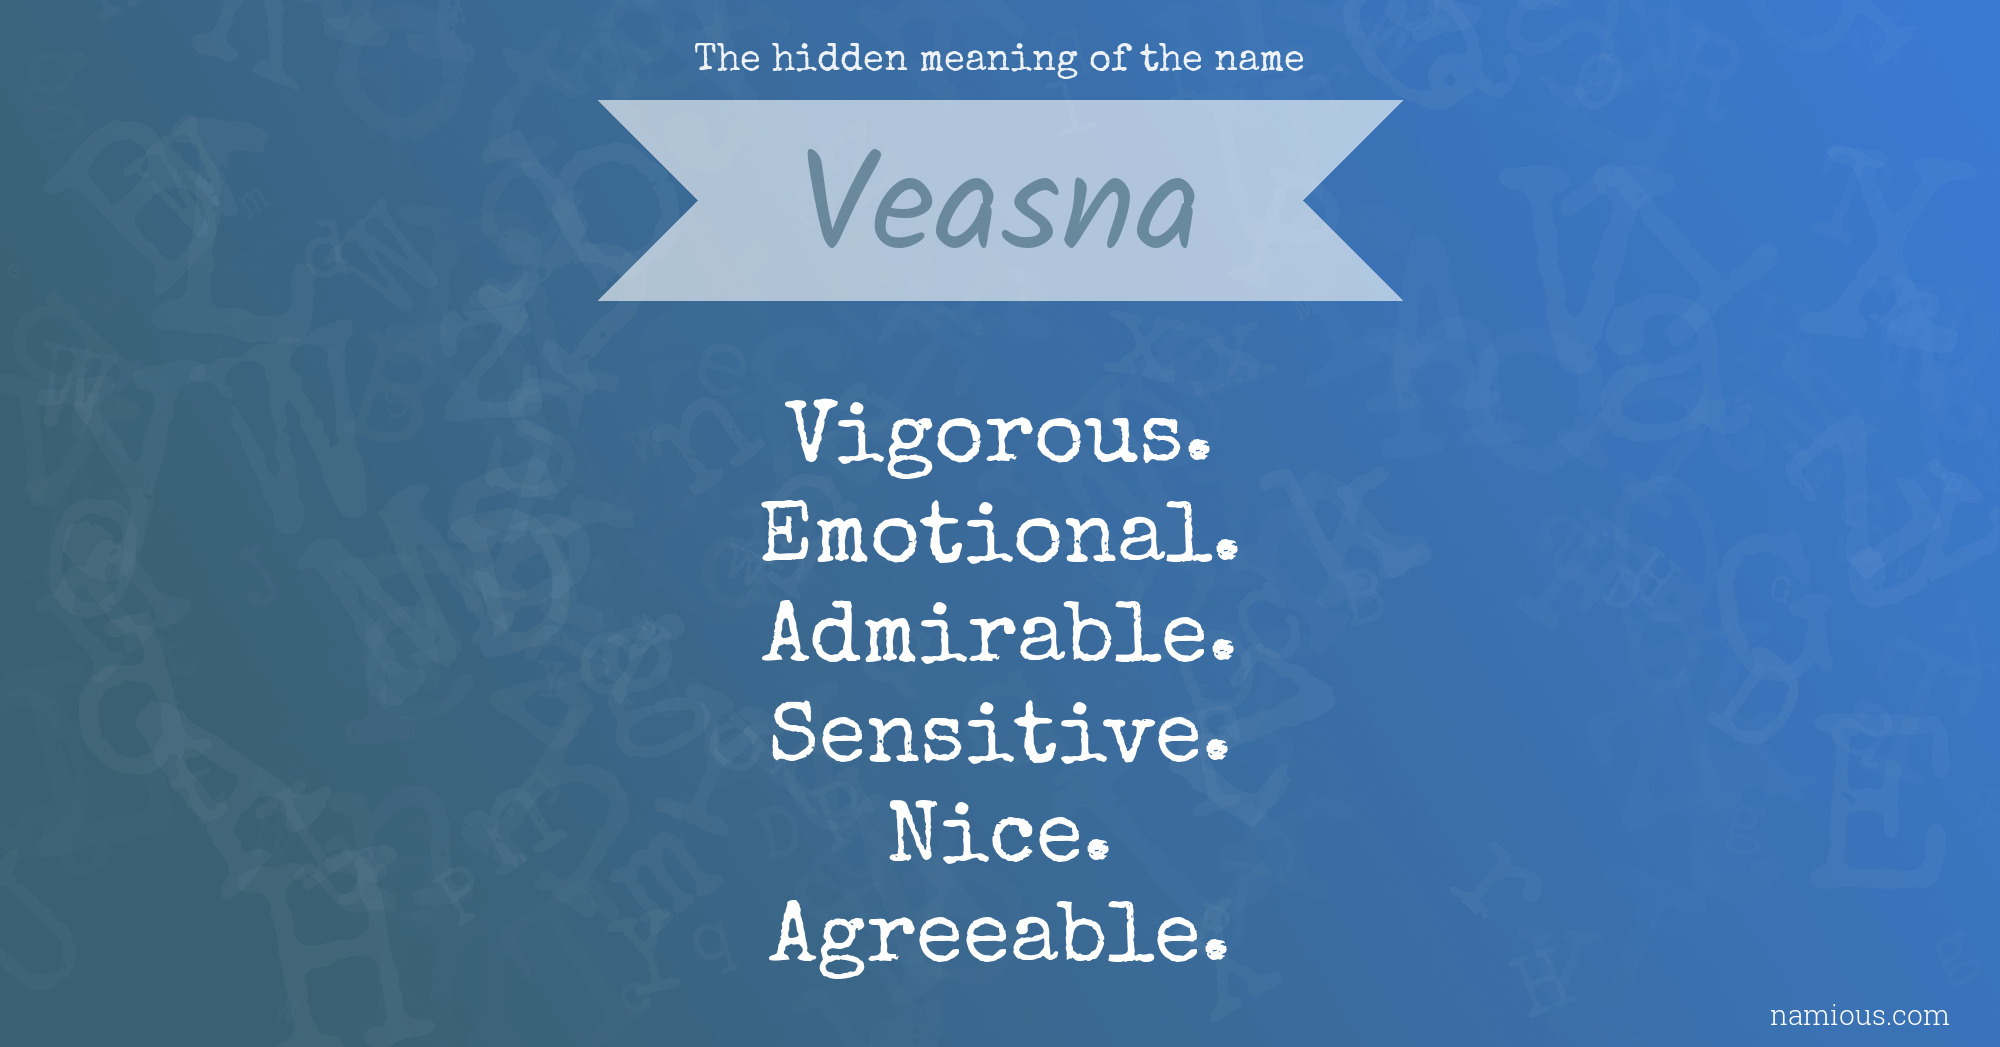 The hidden meaning of the name Veasna